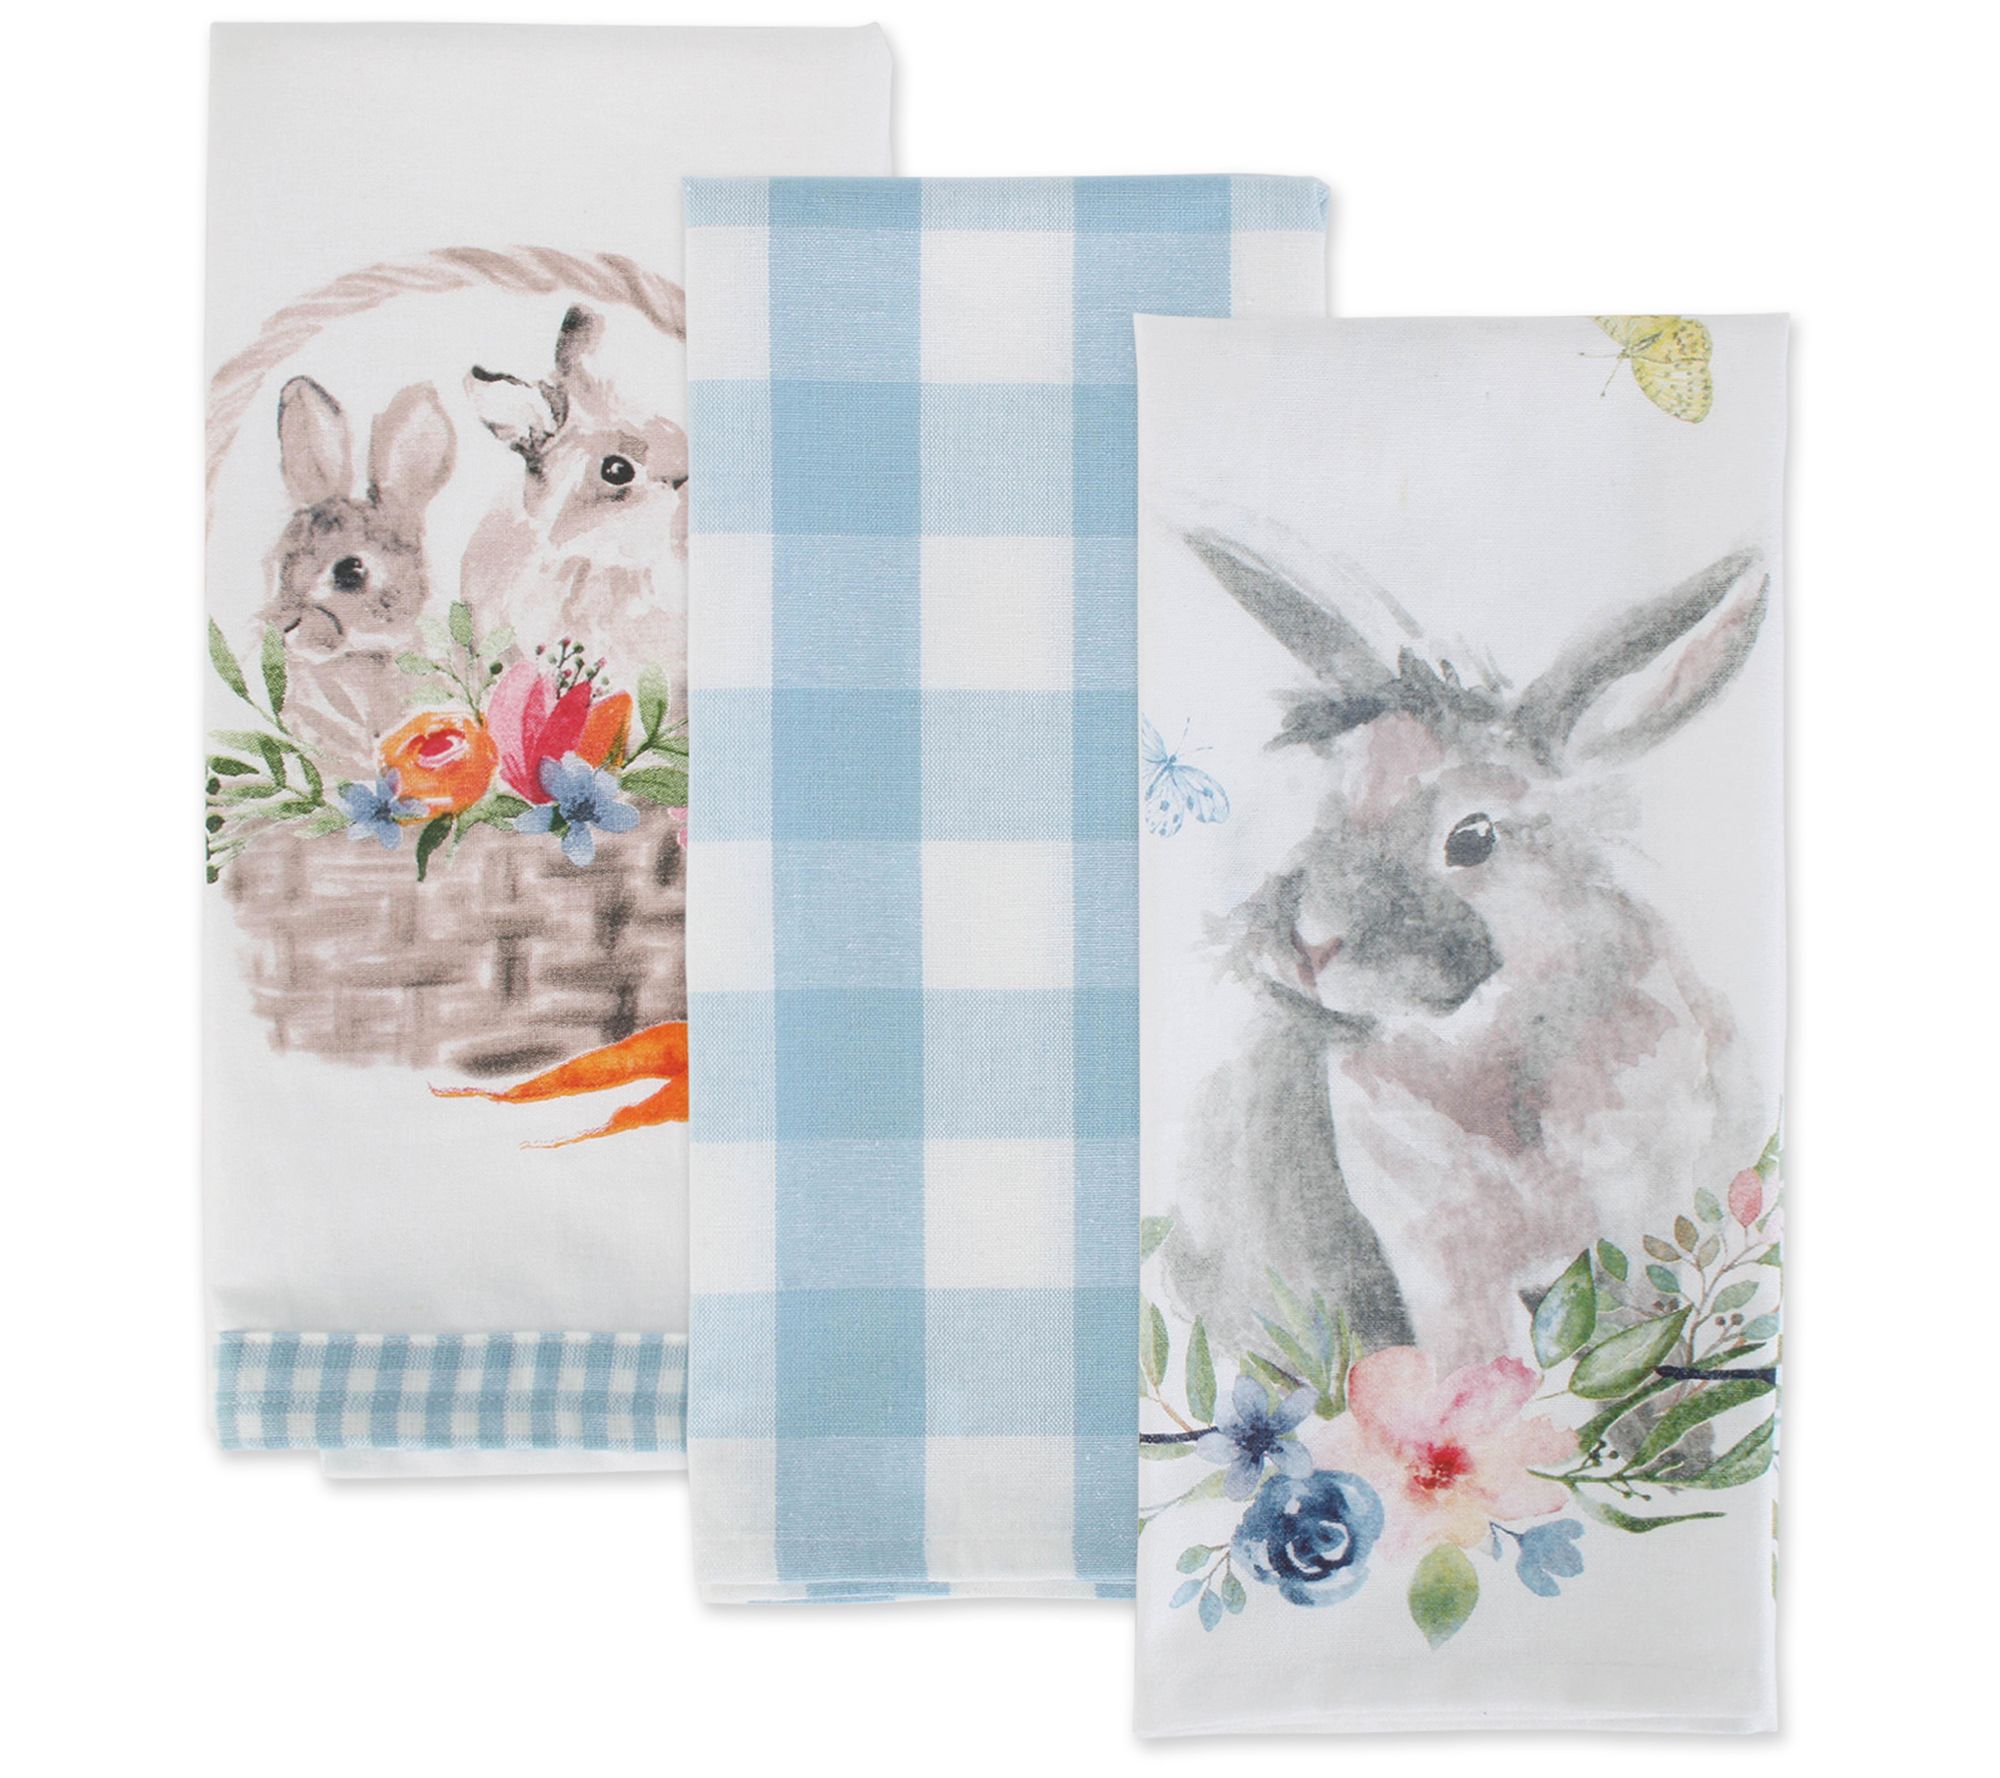 BUNNY RABBIT EASTER SET 2 HAND TOWELS EMBROIDERED by laura 